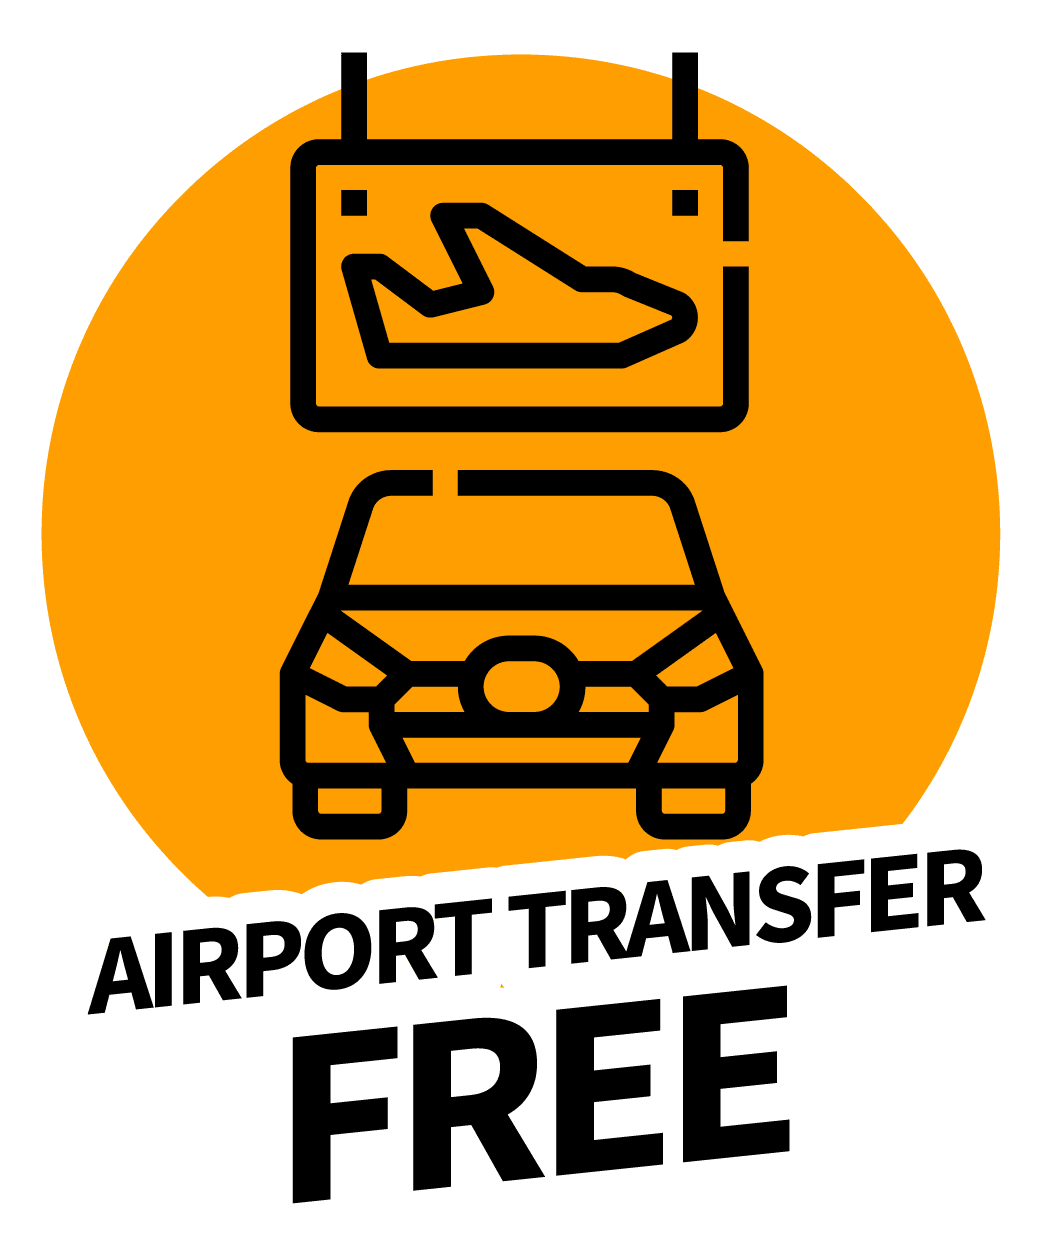 RV hire New Zealand airport transfer icon